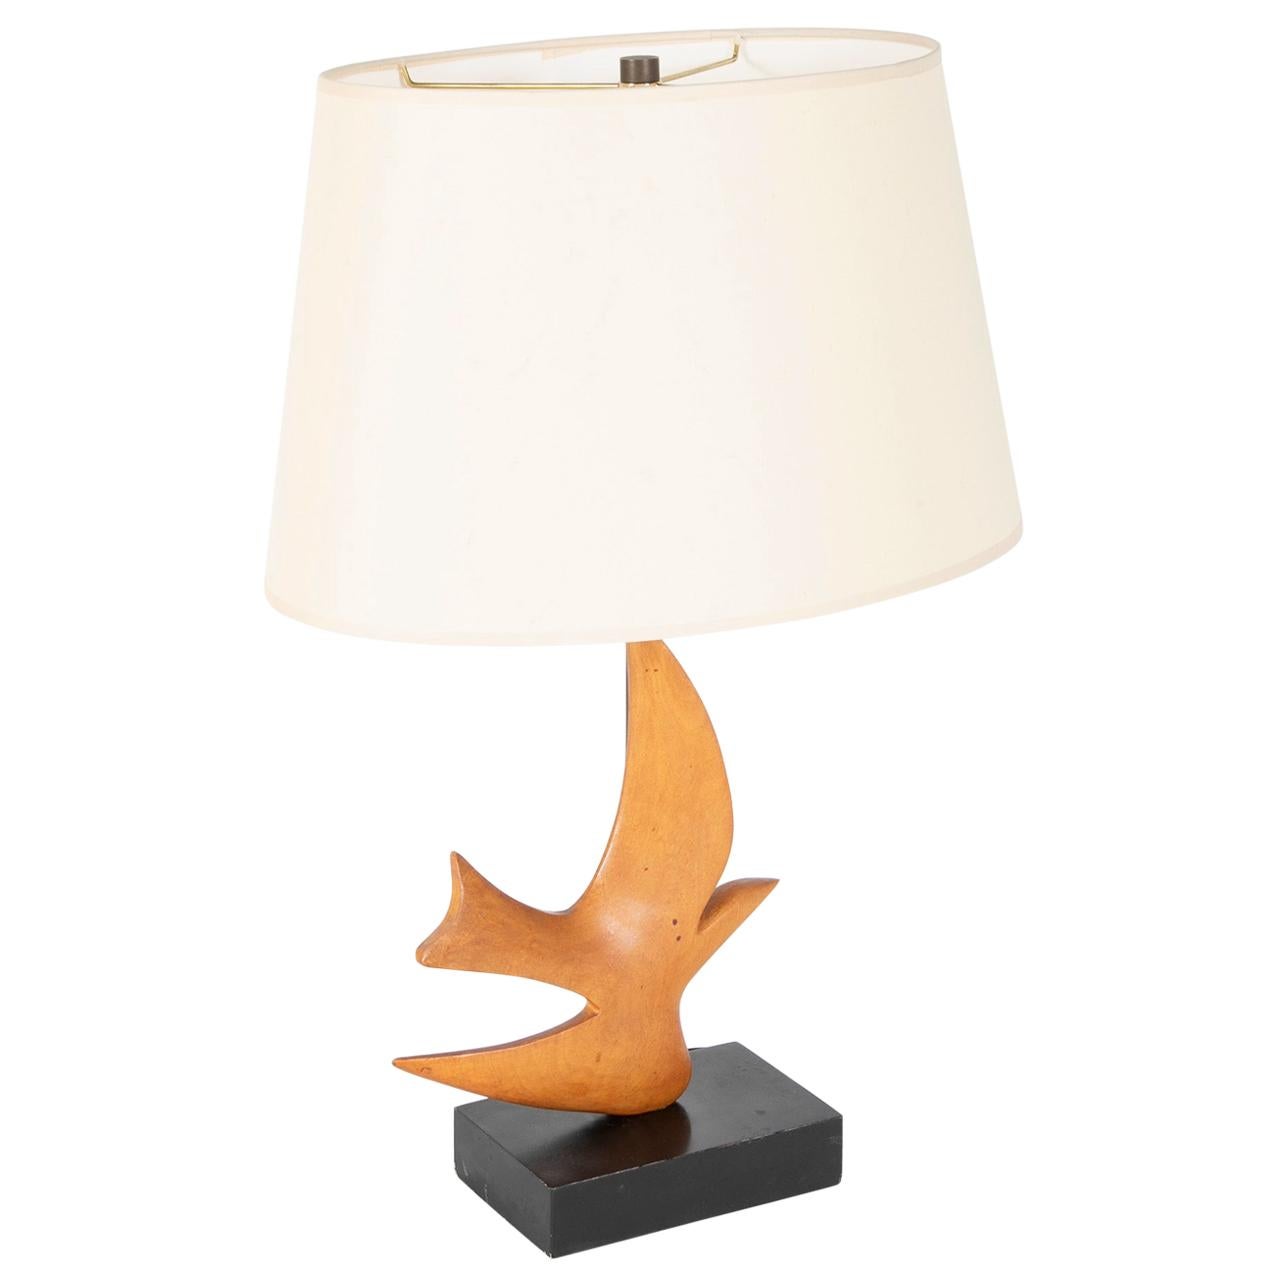 Midcentury Carved Wood Lamp Inspired by 'Oiseau de Braque'